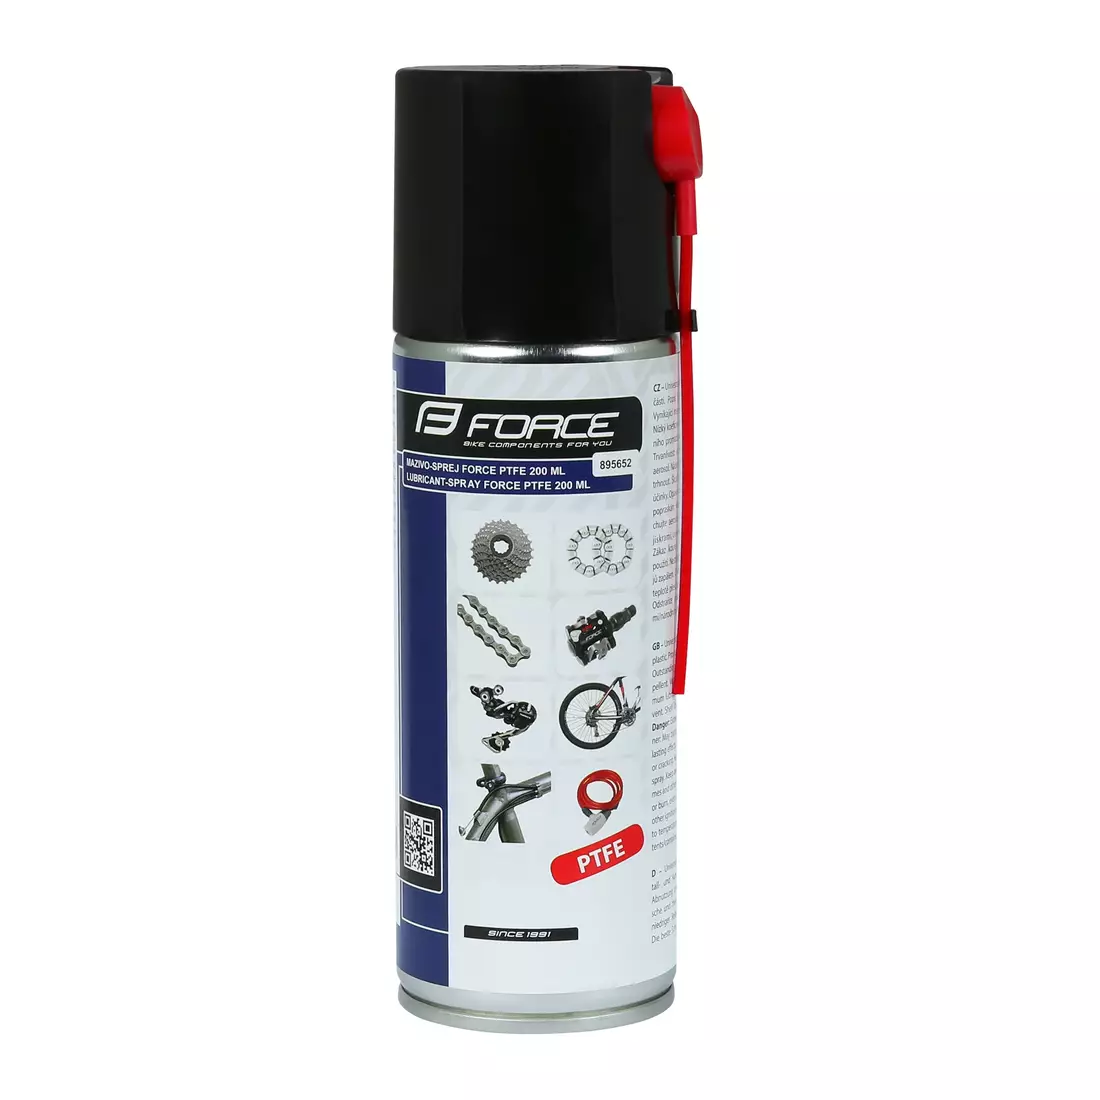 FORCE Bicycle grease PTFE, SPRAY 200ml 895652